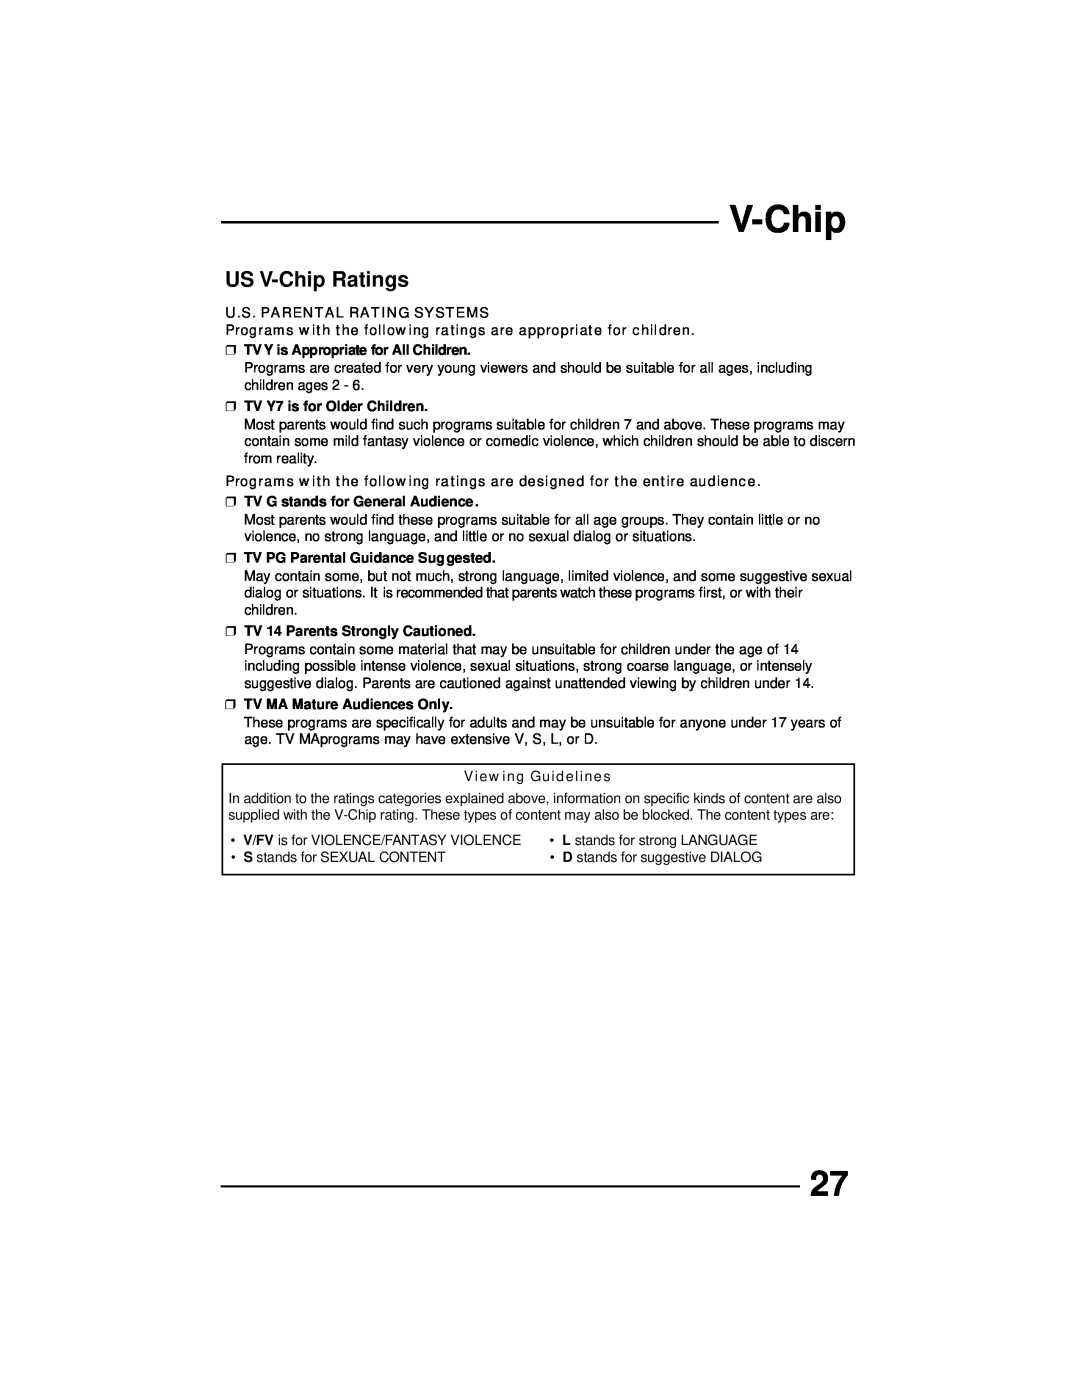 JVC AV 32D202 US V-Chip Ratings, U.S. Parental Rating Systems, TV Y is Appropriate for All Children, Viewing Guidelines 